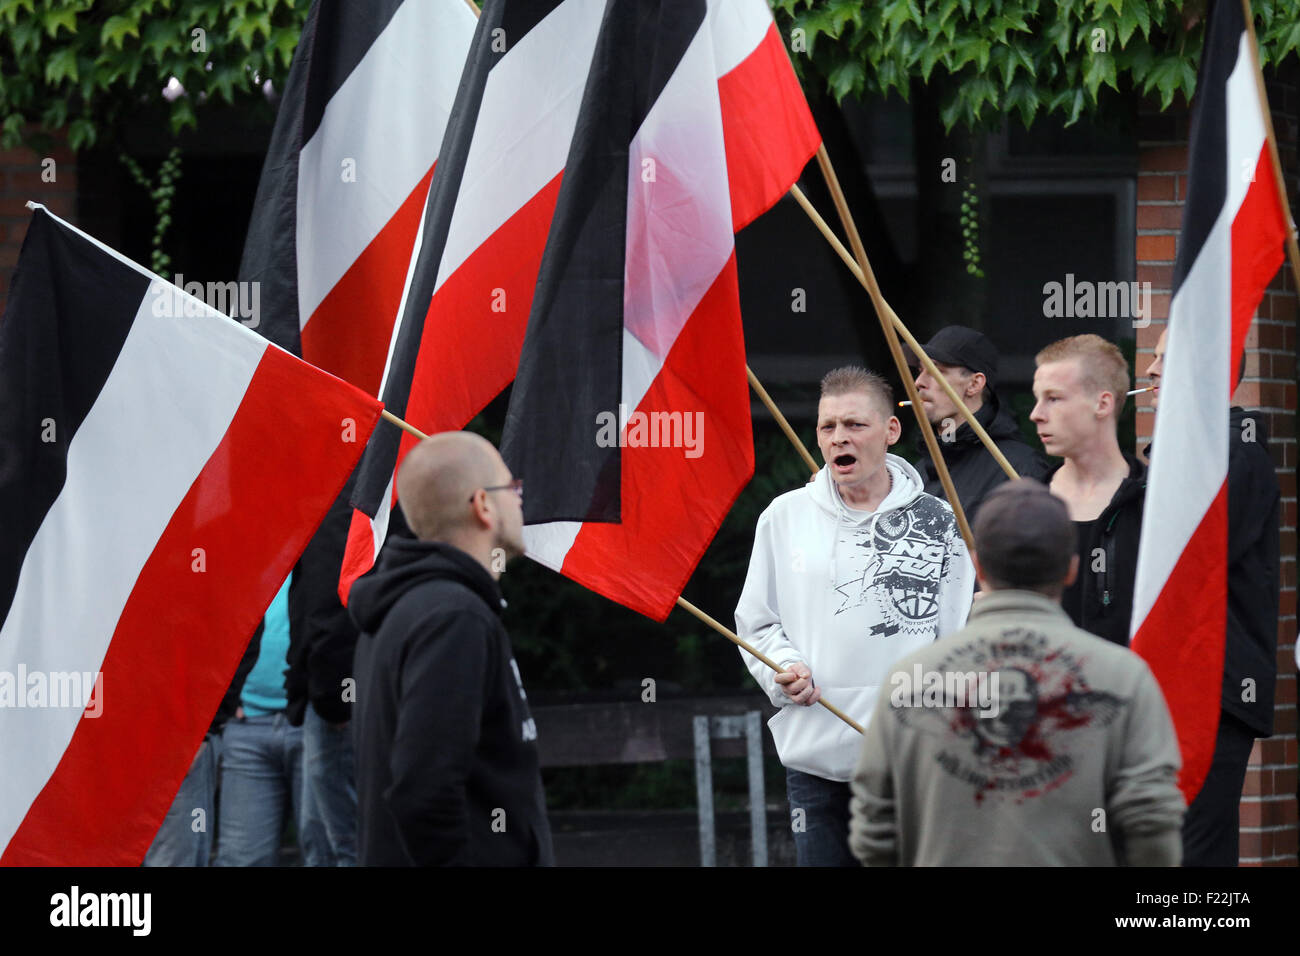 Supporters of the german far right neo-nazi party DIE RECHTE (the rights) waving the flag of the German Empire (Deutsches Reich) in Dortmund/Germany, Sept. 9th. 2015 in protest against the influx of migrants from Asia, Africa and the Middle East to Germany. Stock Photo